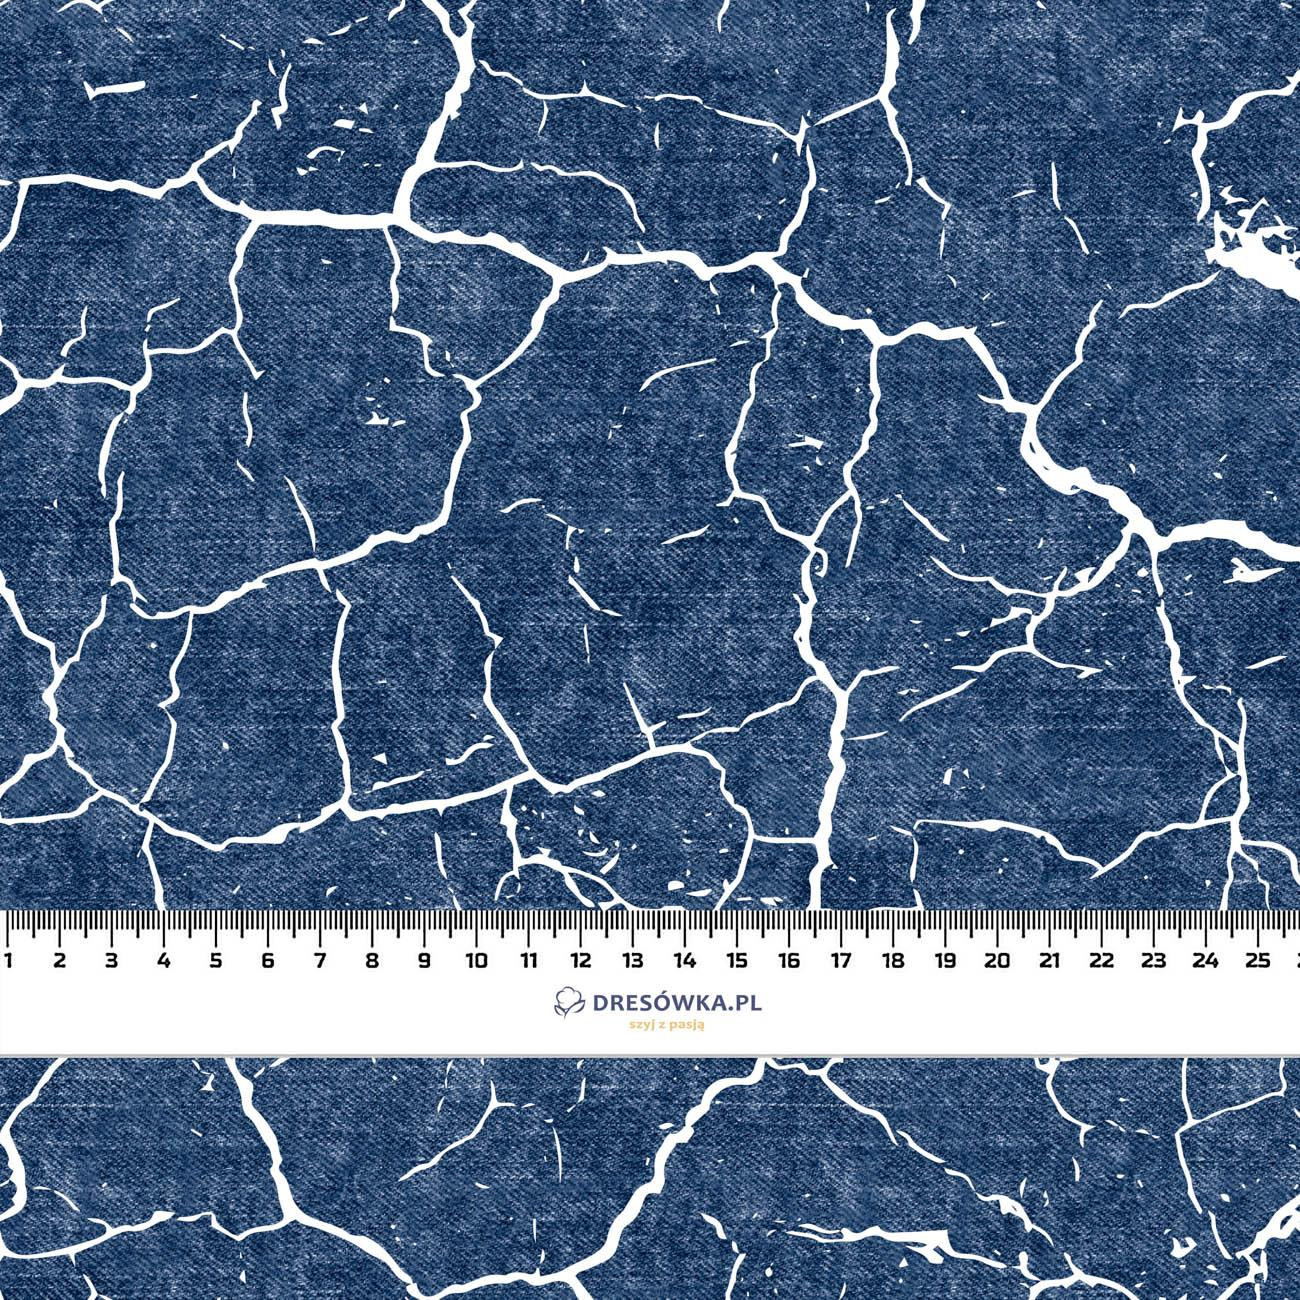 SCORCHED EARTH (white) / ACID WASH (dark blue) - looped knit fabric